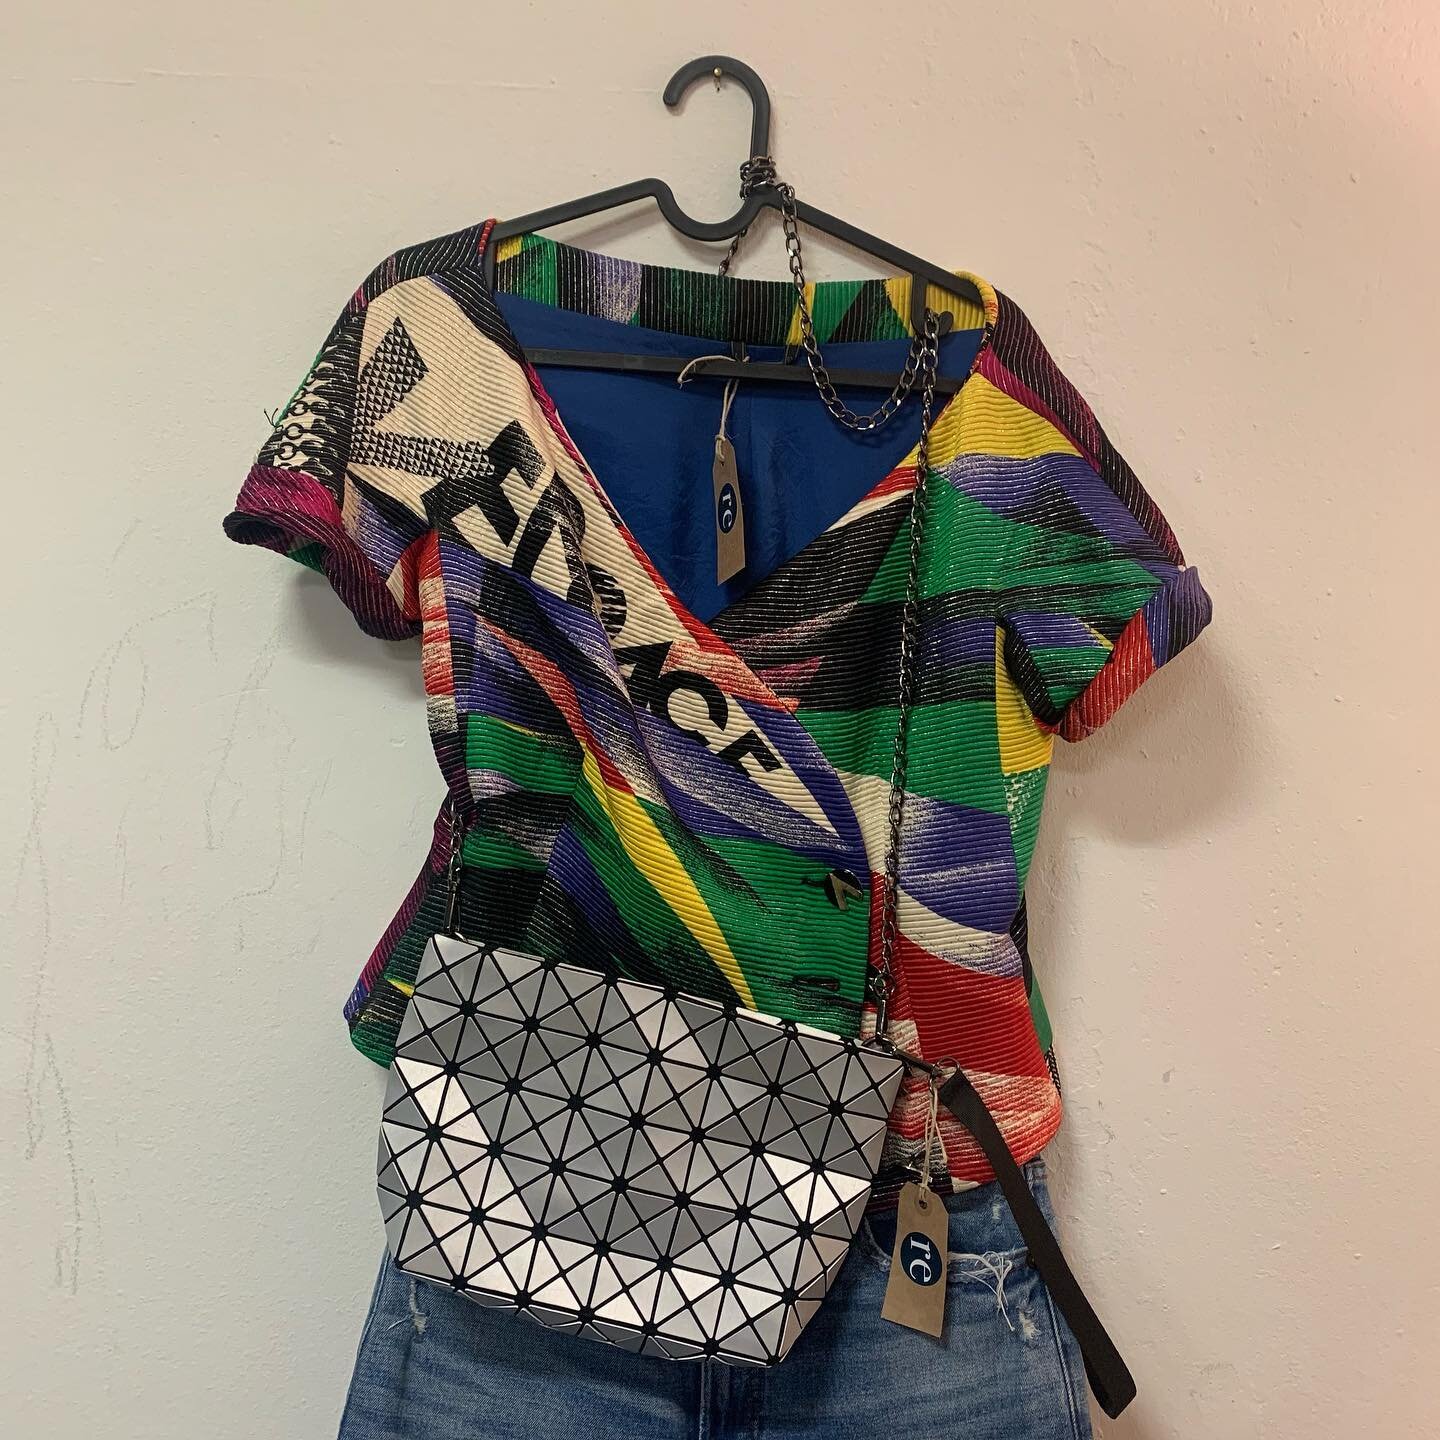 United colors&hellip; 🔴🟡🔵⚪️🟢🟣⚫️

Haut Versace multicolore / CHF 89.- 
Sac &agrave; main Issey Miyake / CHF 209.-
Veste Max Mara / taille 38 / CHF 139.- 
Jeans Abercombie &amp; Fitch / taille 27/4 / CHF 39.- 
Bottines Ausoni grises / taille 38 / 